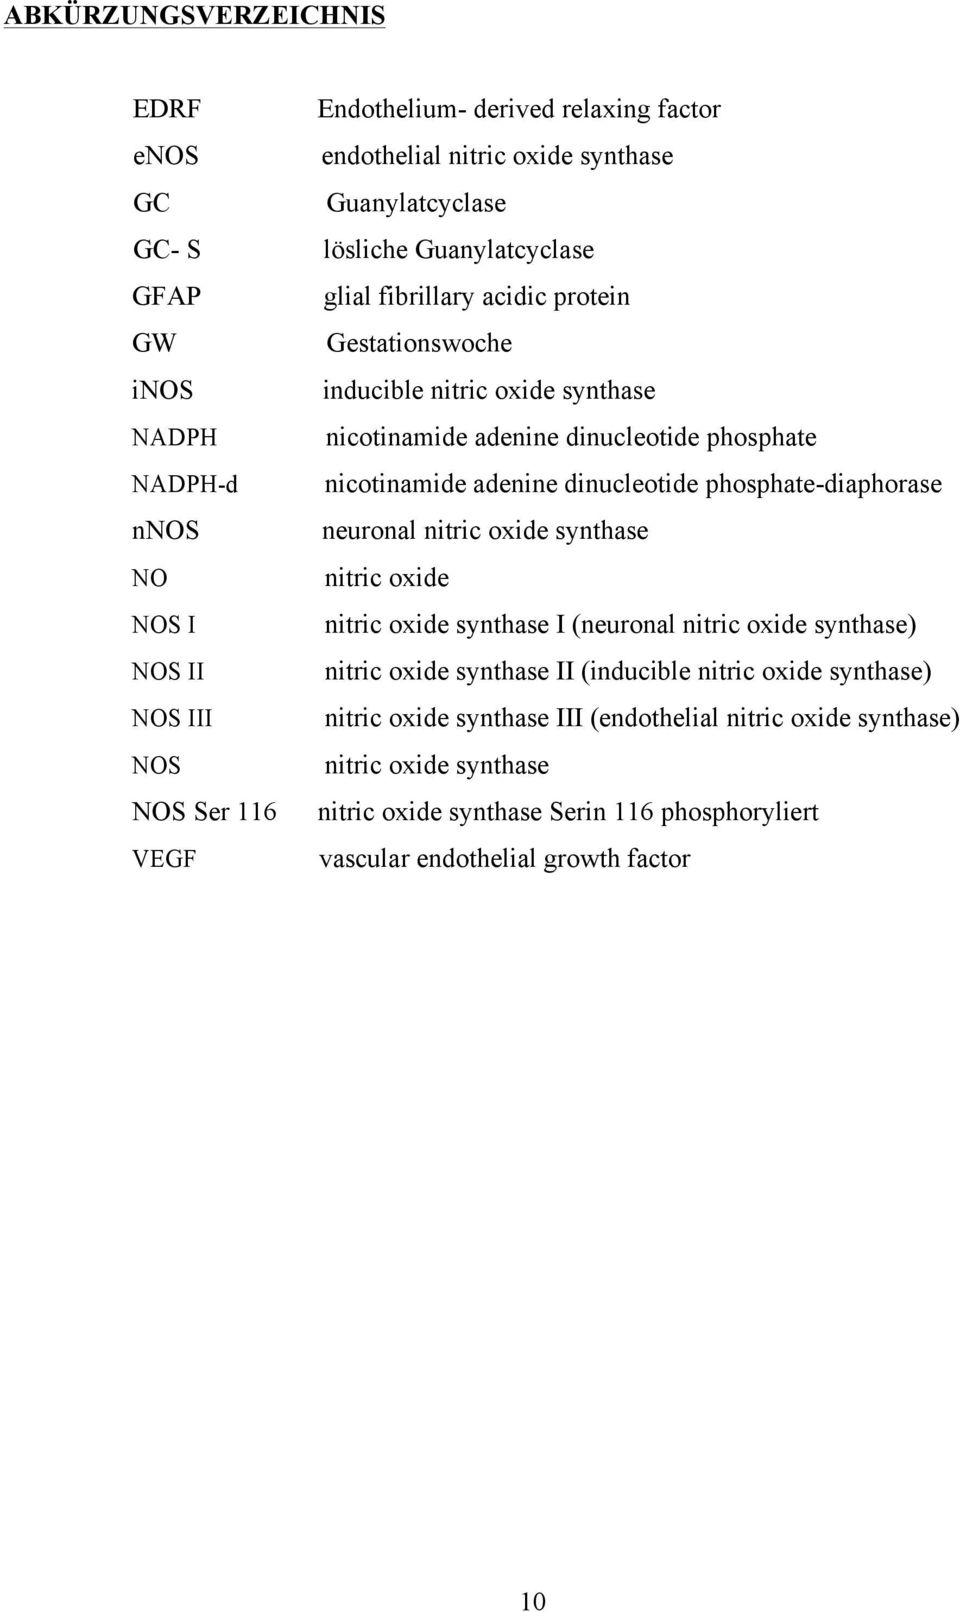 nicotinamide adenine dinucleotide phosphate-diaphorase neuronal nitric oxide synthase nitric oxide nitric oxide synthase I (neuronal nitric oxide synthase) nitric oxide synthase II